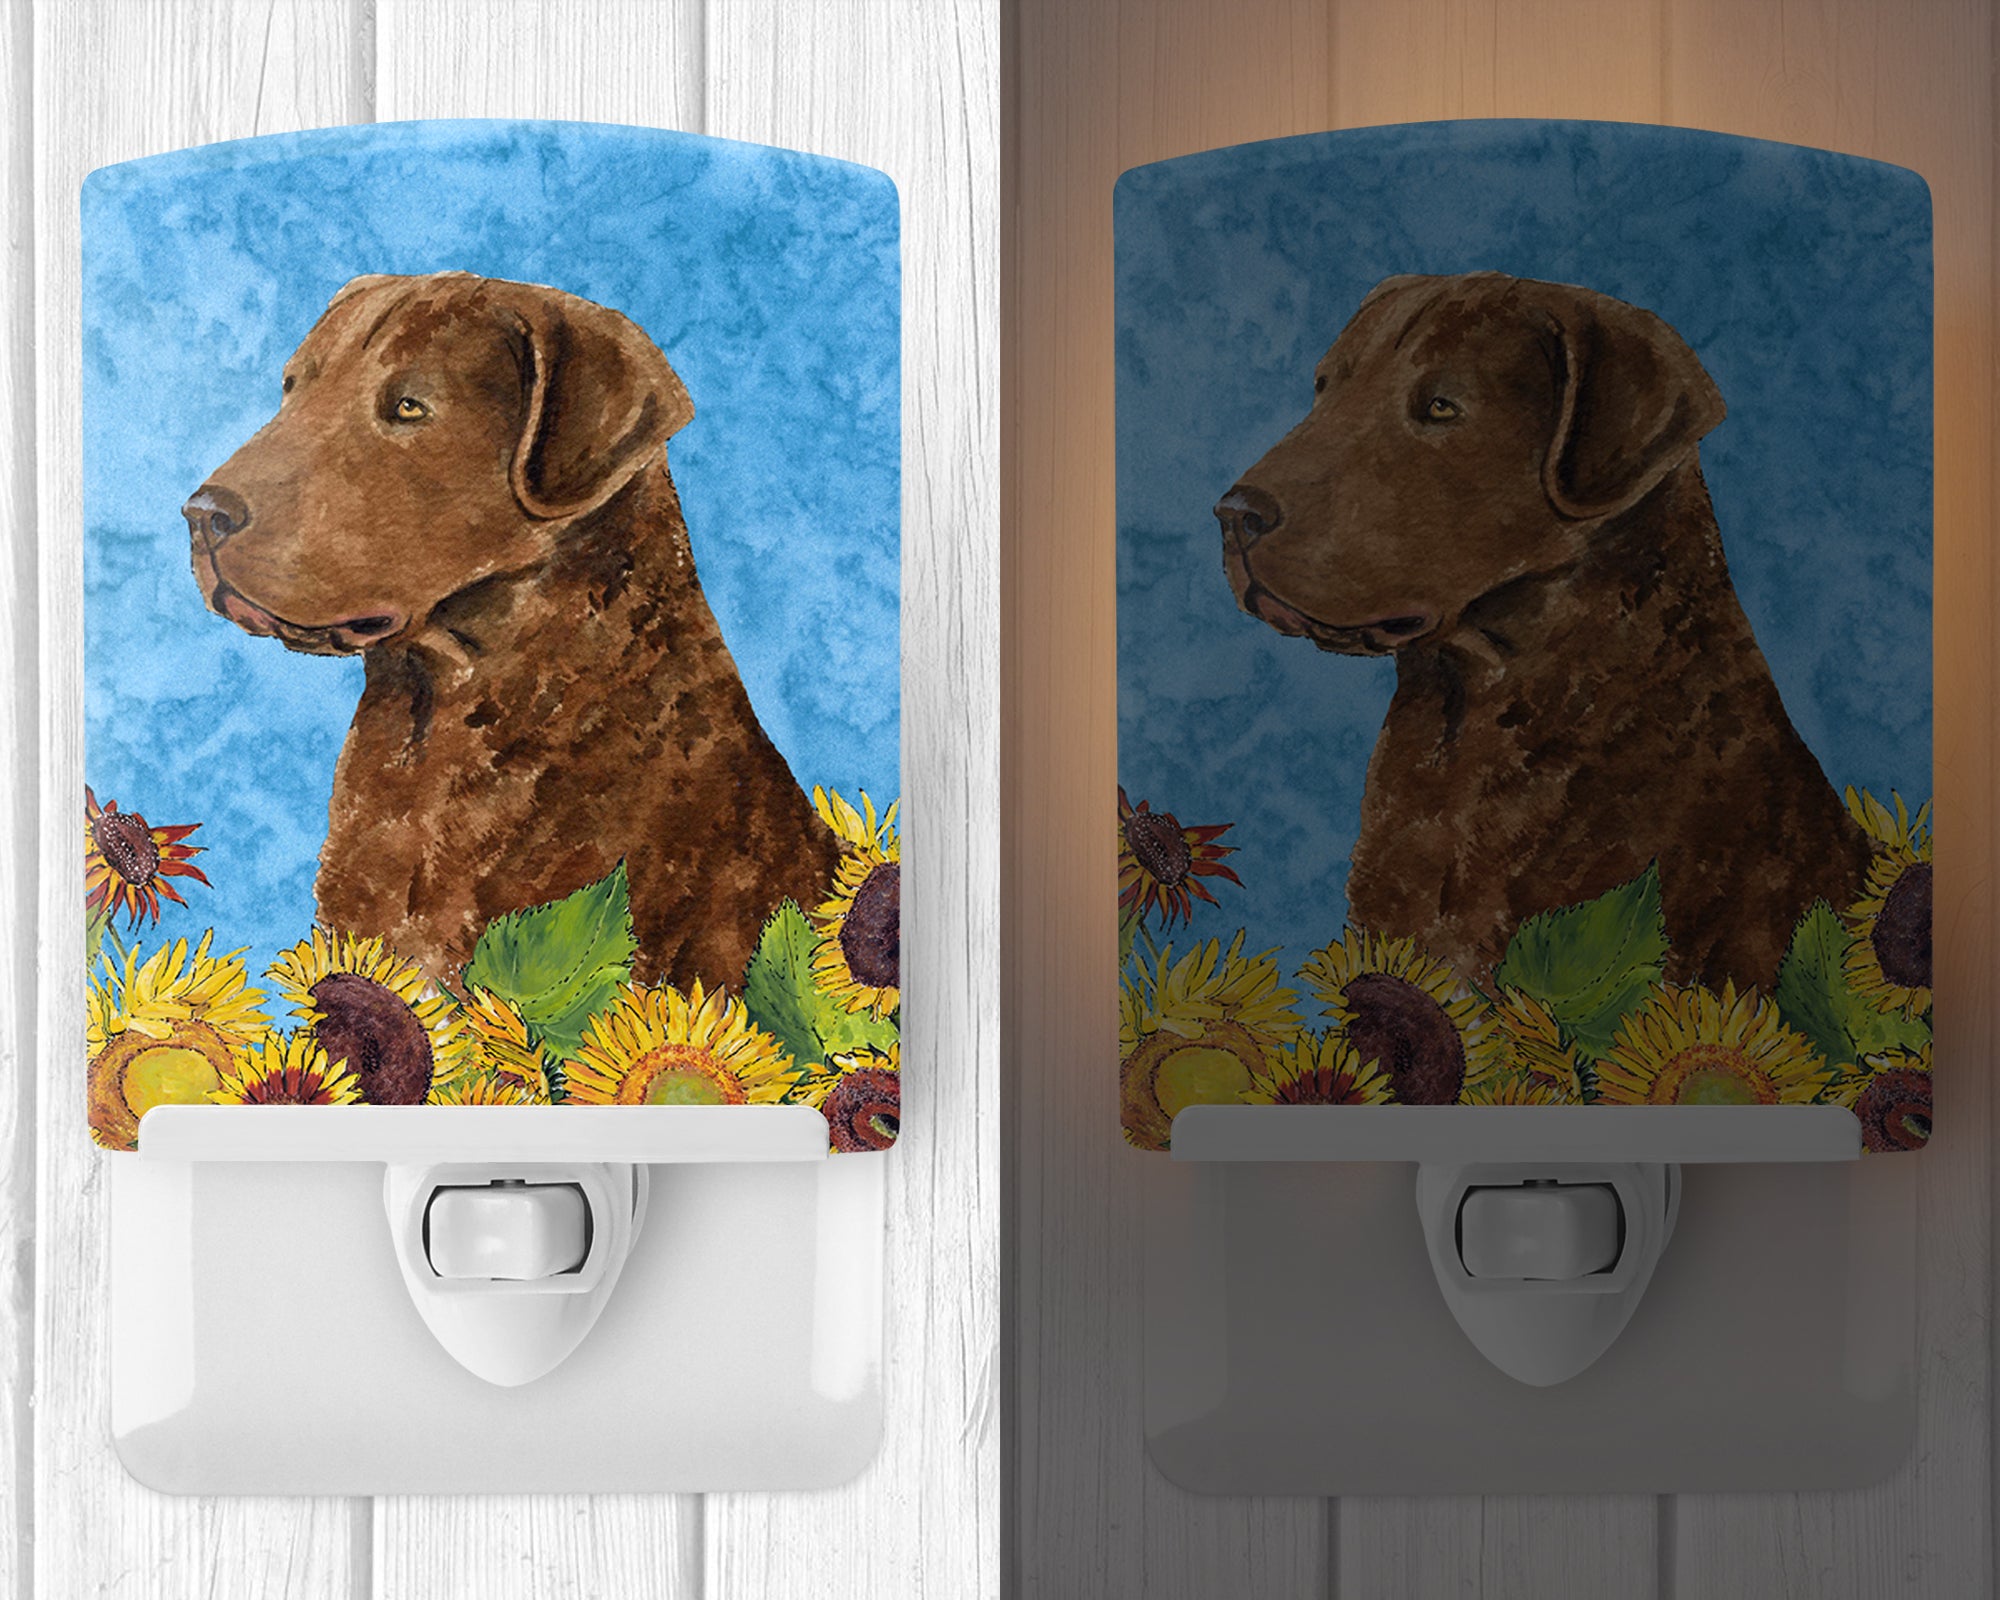 Curly Coated Retriever in Summer Flowers Ceramic Night Light SS4165CNL - the-store.com